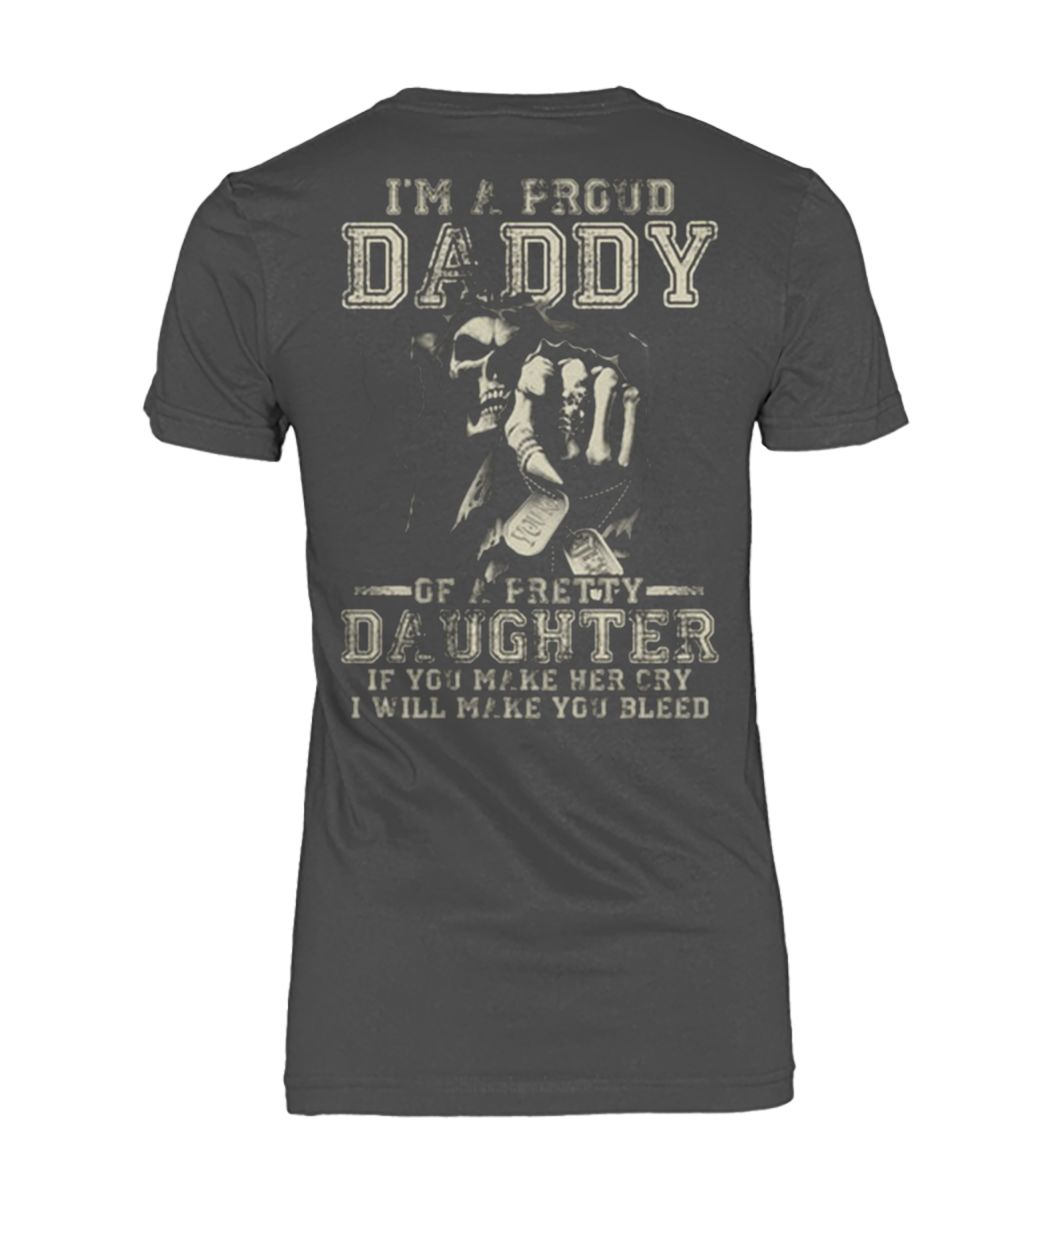 Skull I'm a proud daddy of a pretty daughter women's crew tee